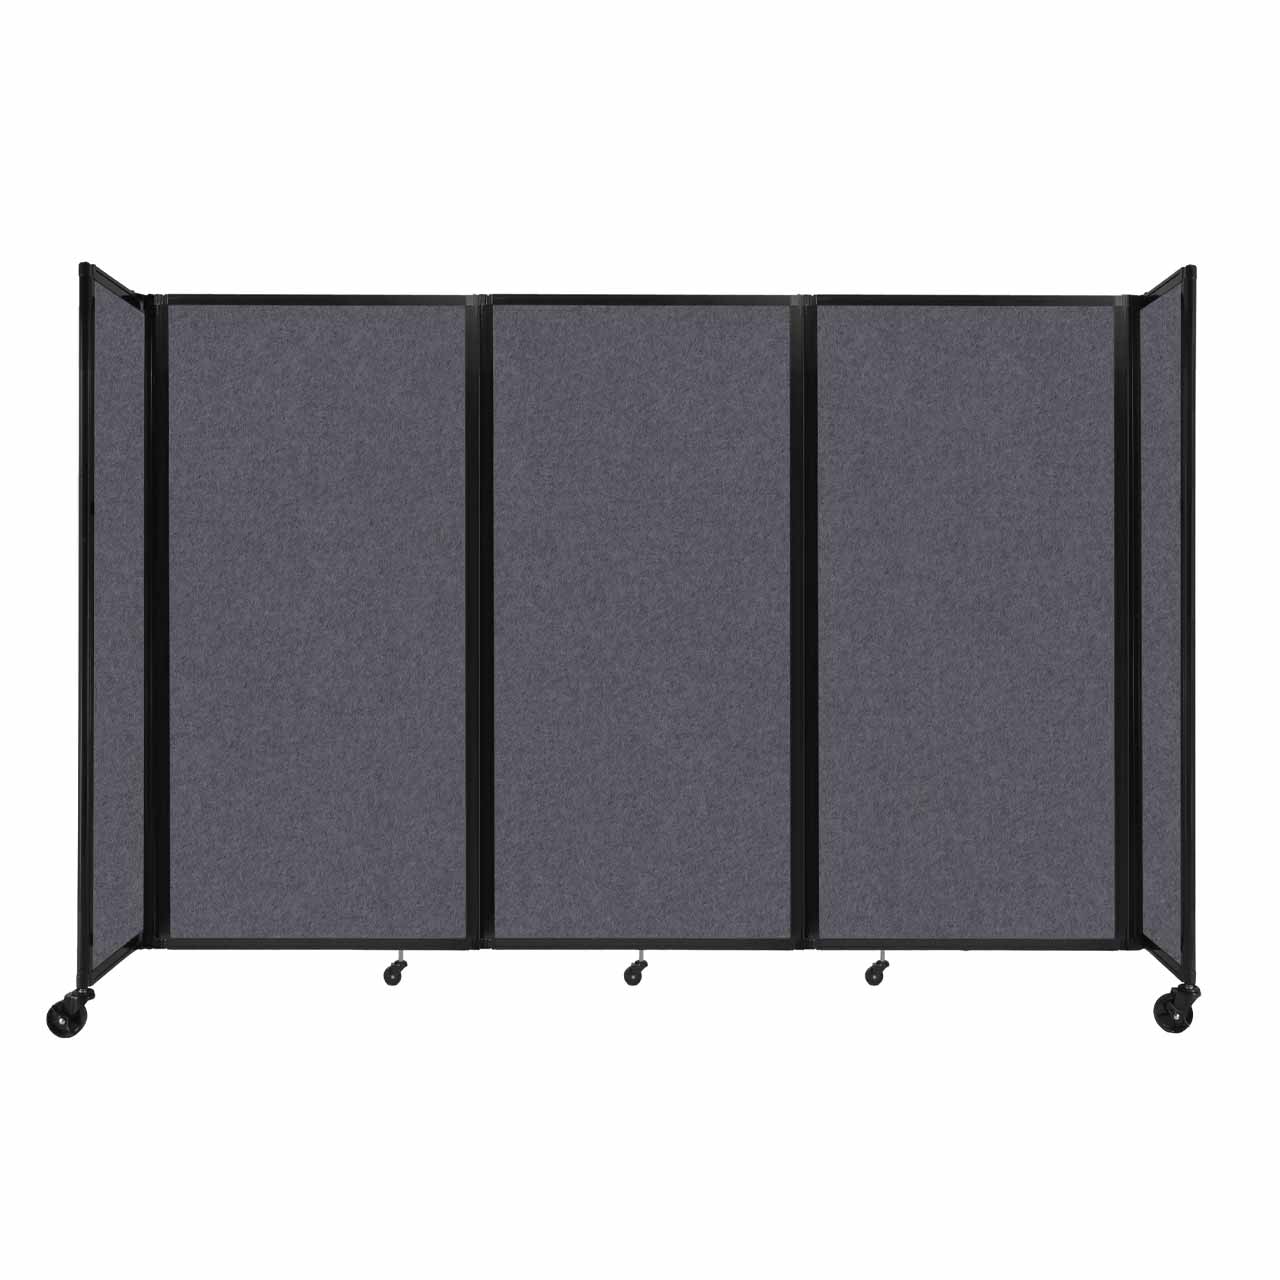 Room Divider 360° Folding Portable Partition with Soundsorb Acoustical Fabric Panels, 8' 6" W x 6' H